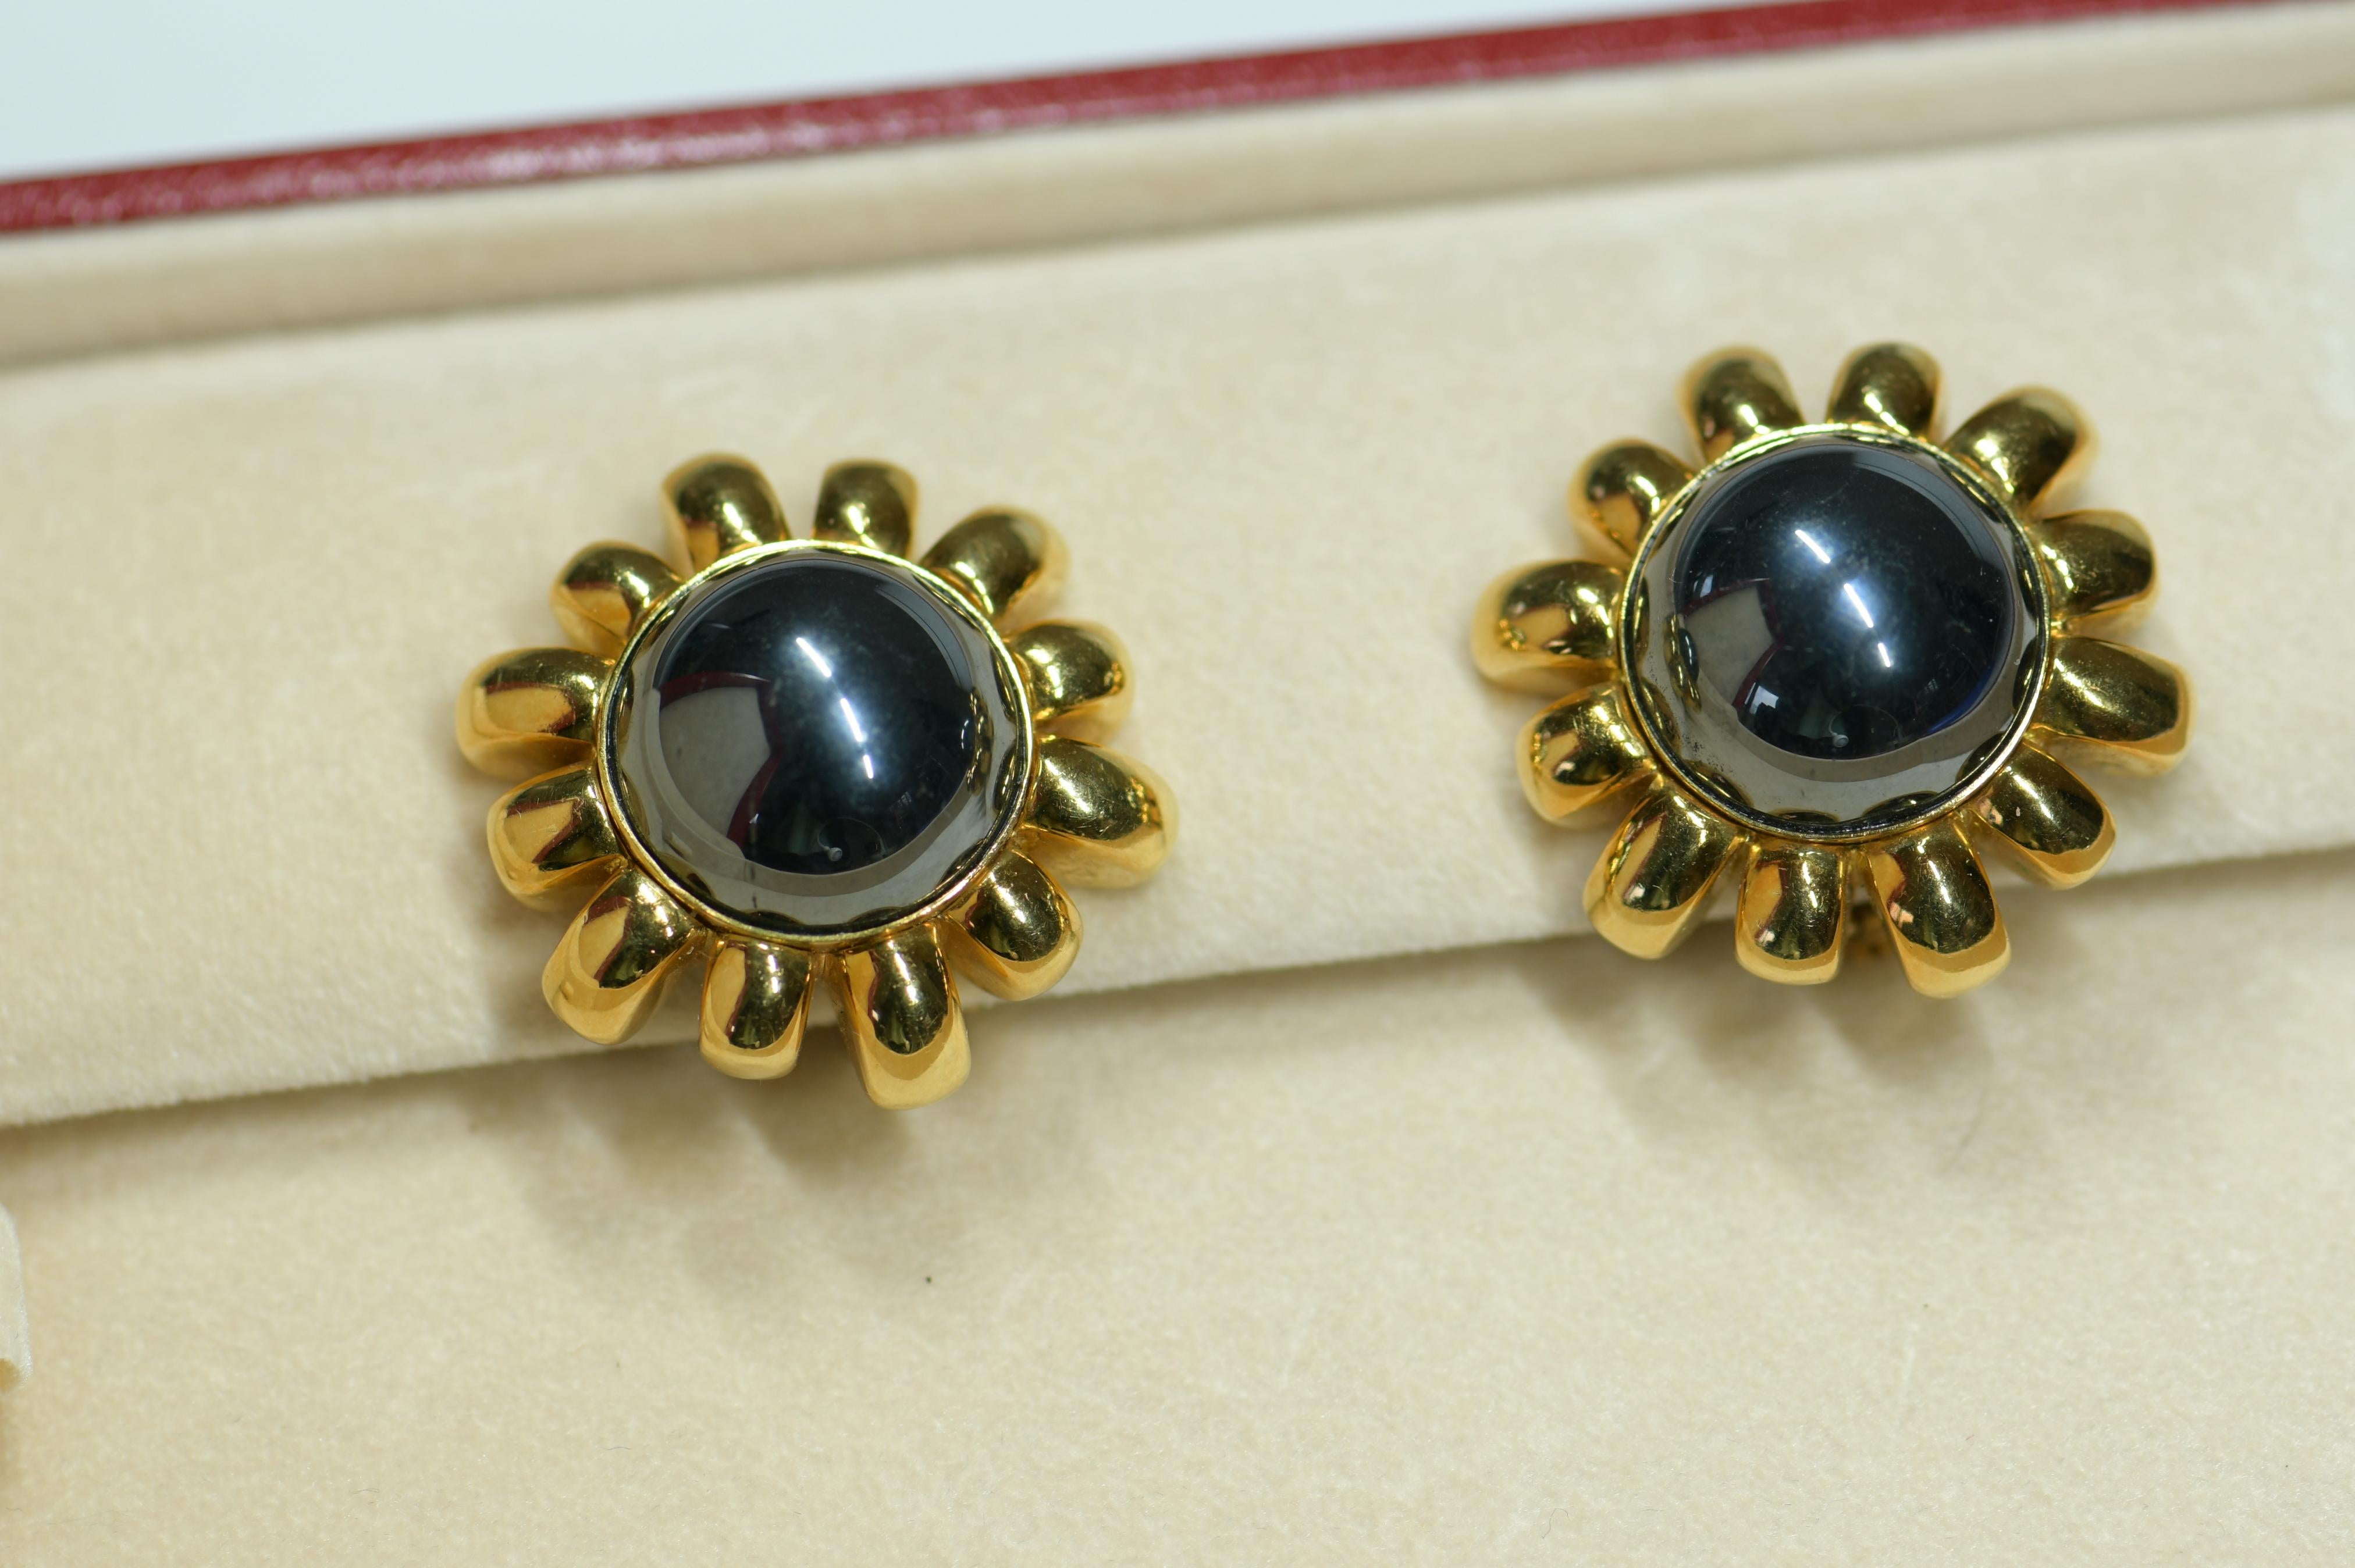 HEMATITE AND GOLD EARRINGS, HARRY WINSTON
Hematite beads, cabochons hematite, gold, earrings 3.0 cm earrings signed Winston.

These decidedly feminine floral earrings are set with cabochons hematite and accented with 18K gold petals. Wonderfully